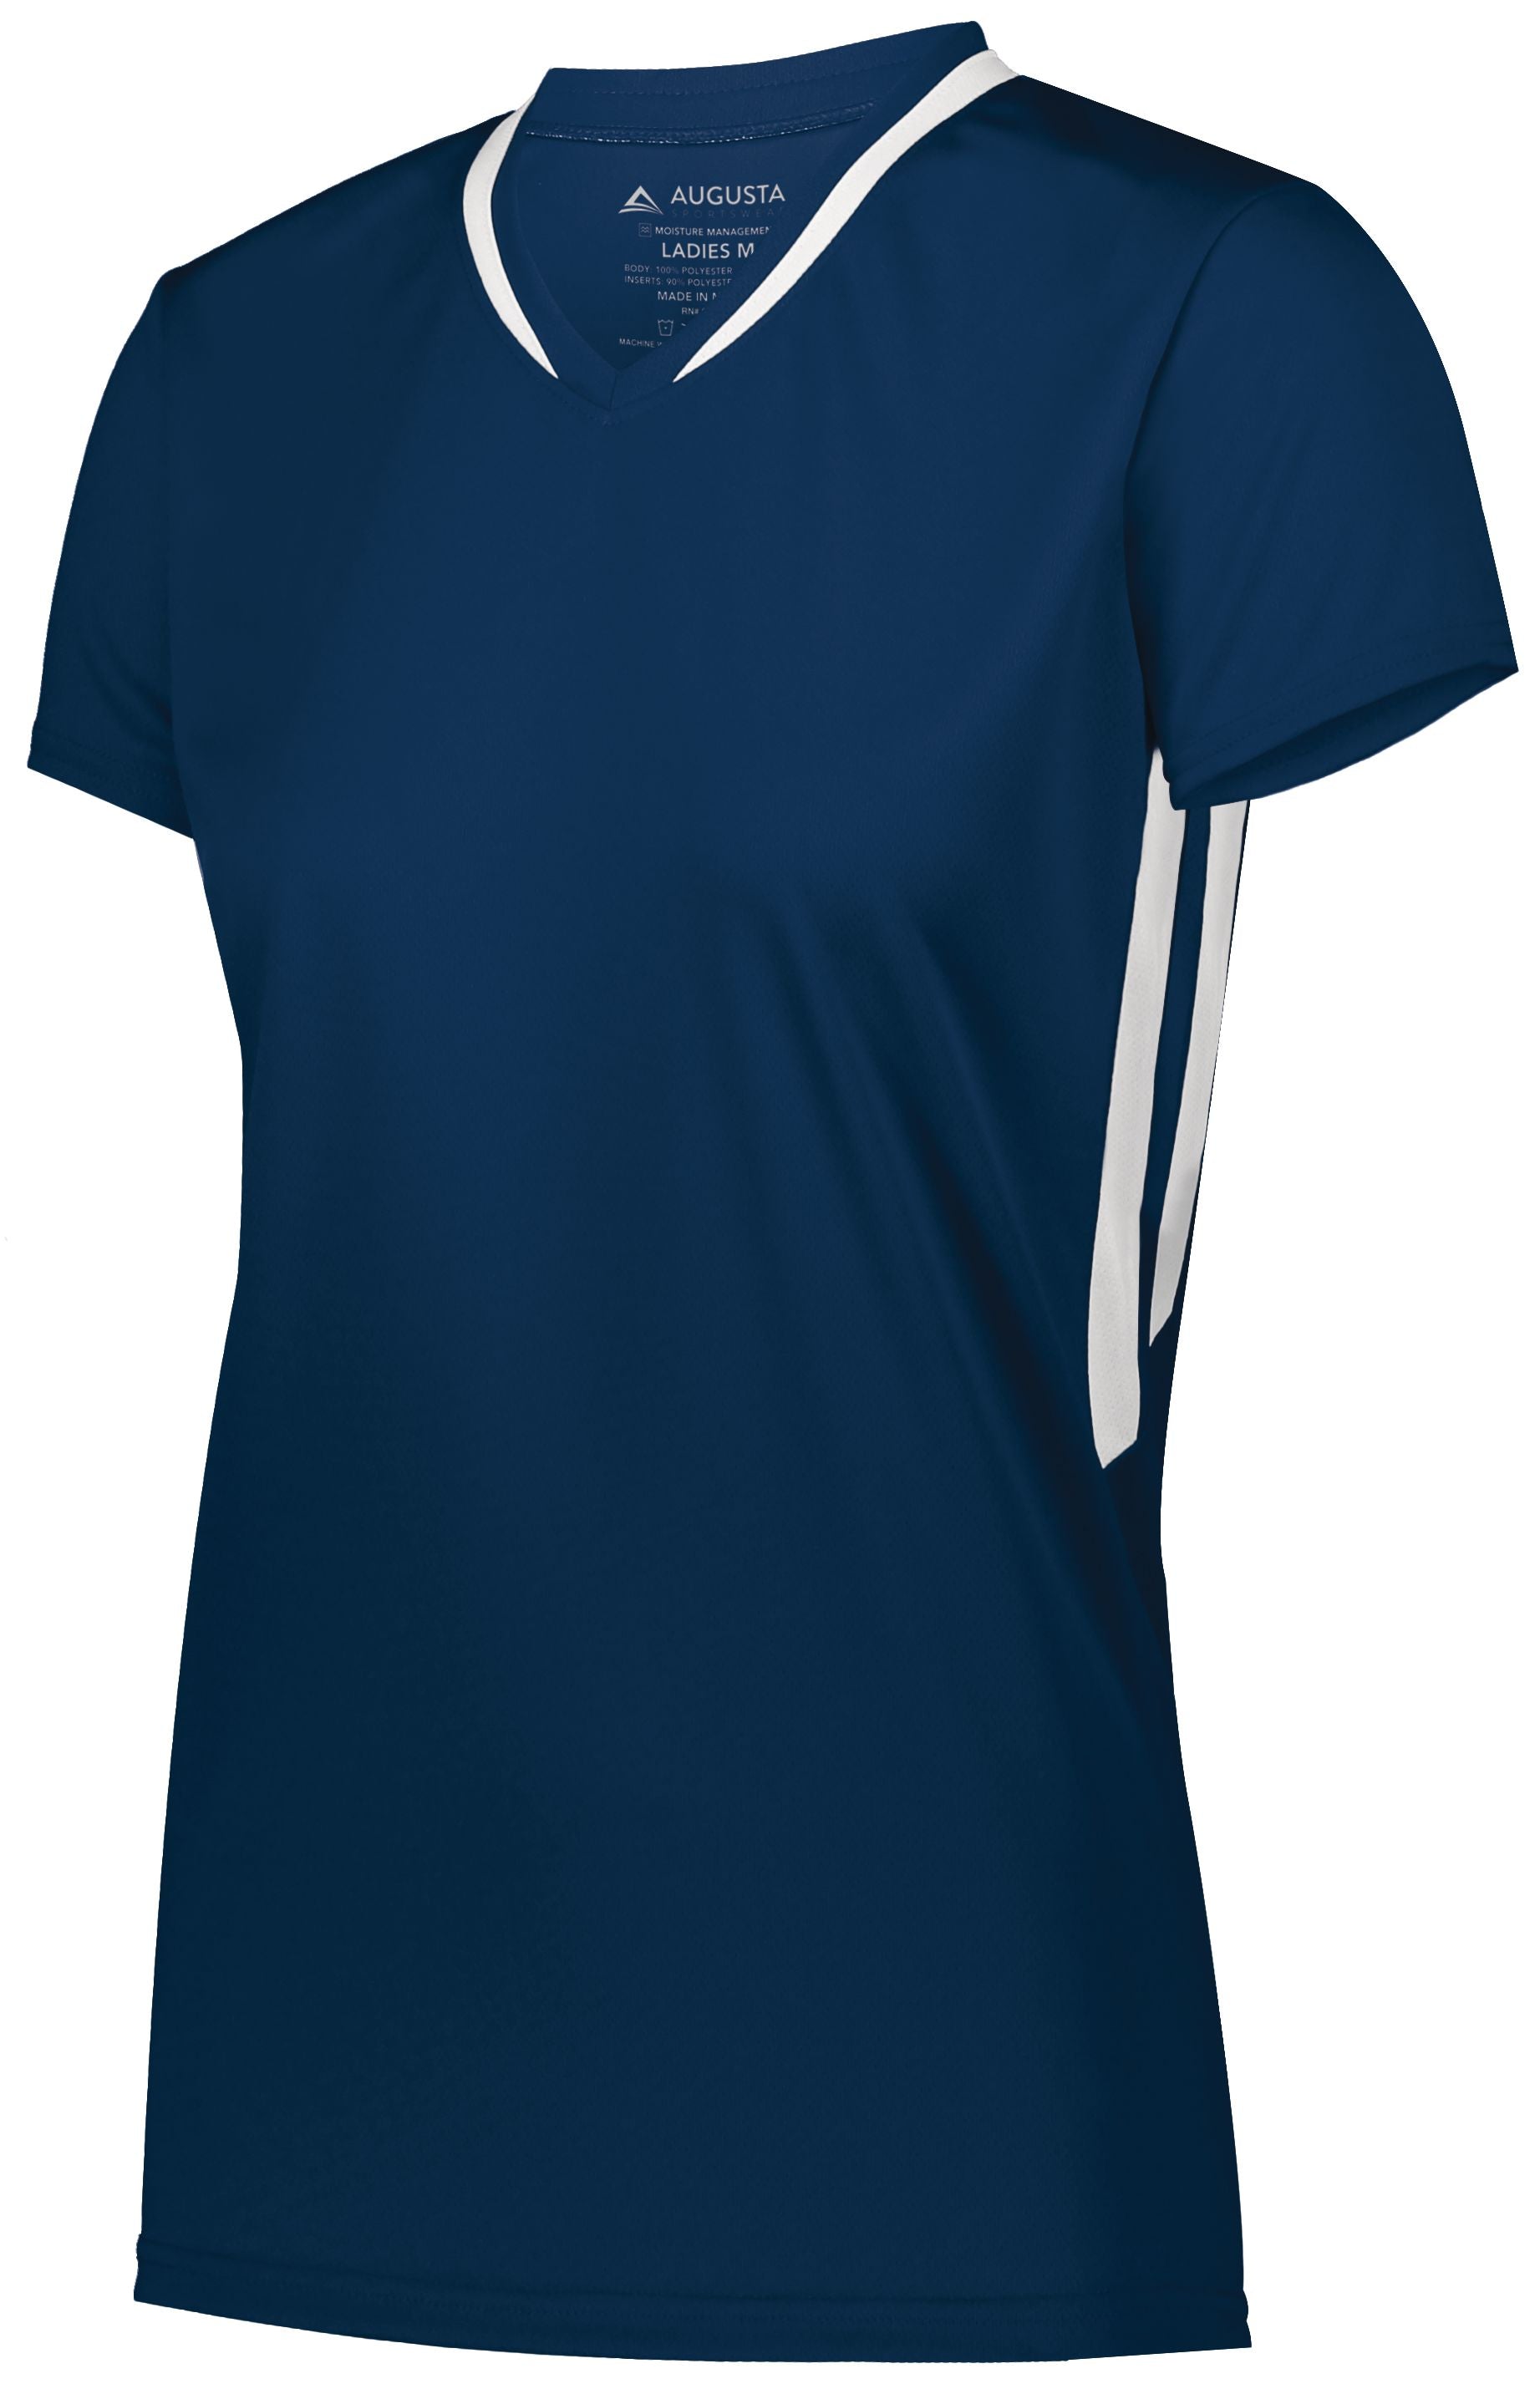 Augusta Sportswear Ladies Full Force Short Sleeve Jersey in Navy/White  -Part of the Ladies, Ladies-Jersey, Augusta-Products, Lacrosse, Shirts, All-Sports, All-Sports-1 product lines at KanaleyCreations.com